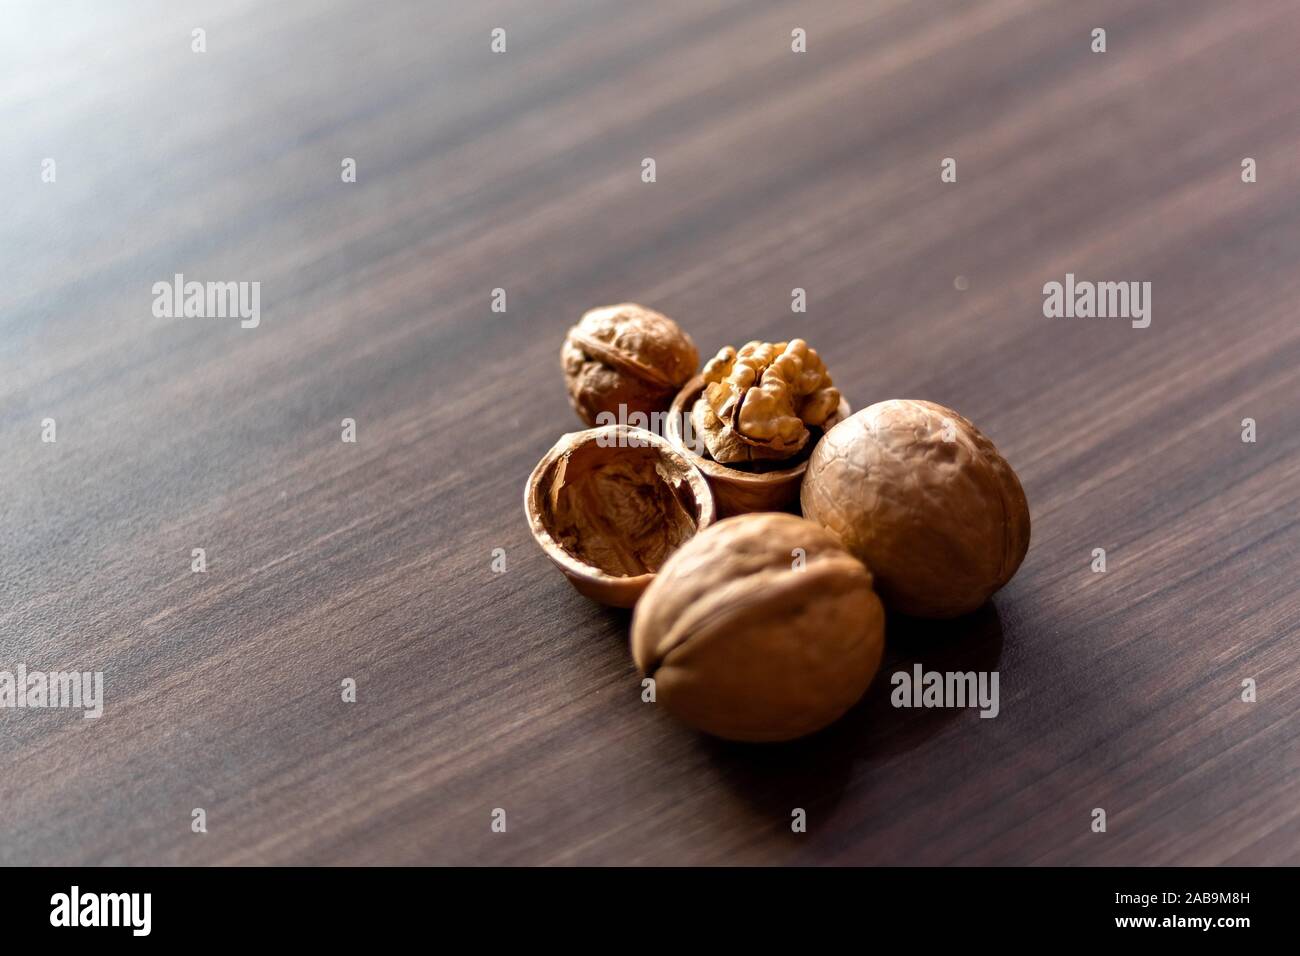 Walnuts kernels on wooden desk with color background, Whole walnut in wood vintage bowl. Stock Photo